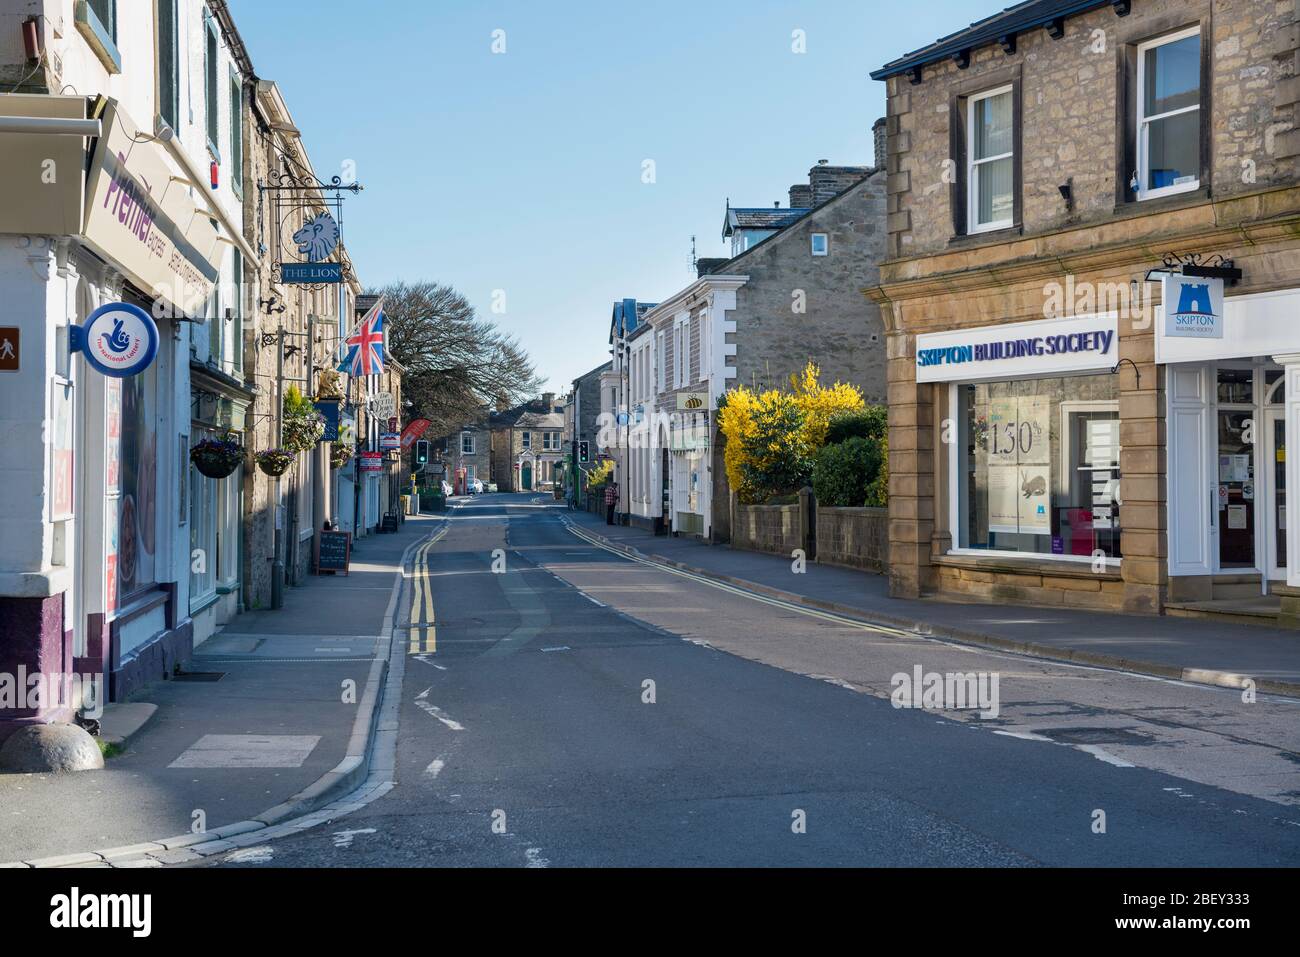 Shops, a pub and building society on Duke Street in the centre of the small Yorkshire Dales town of Settle Stock Photo